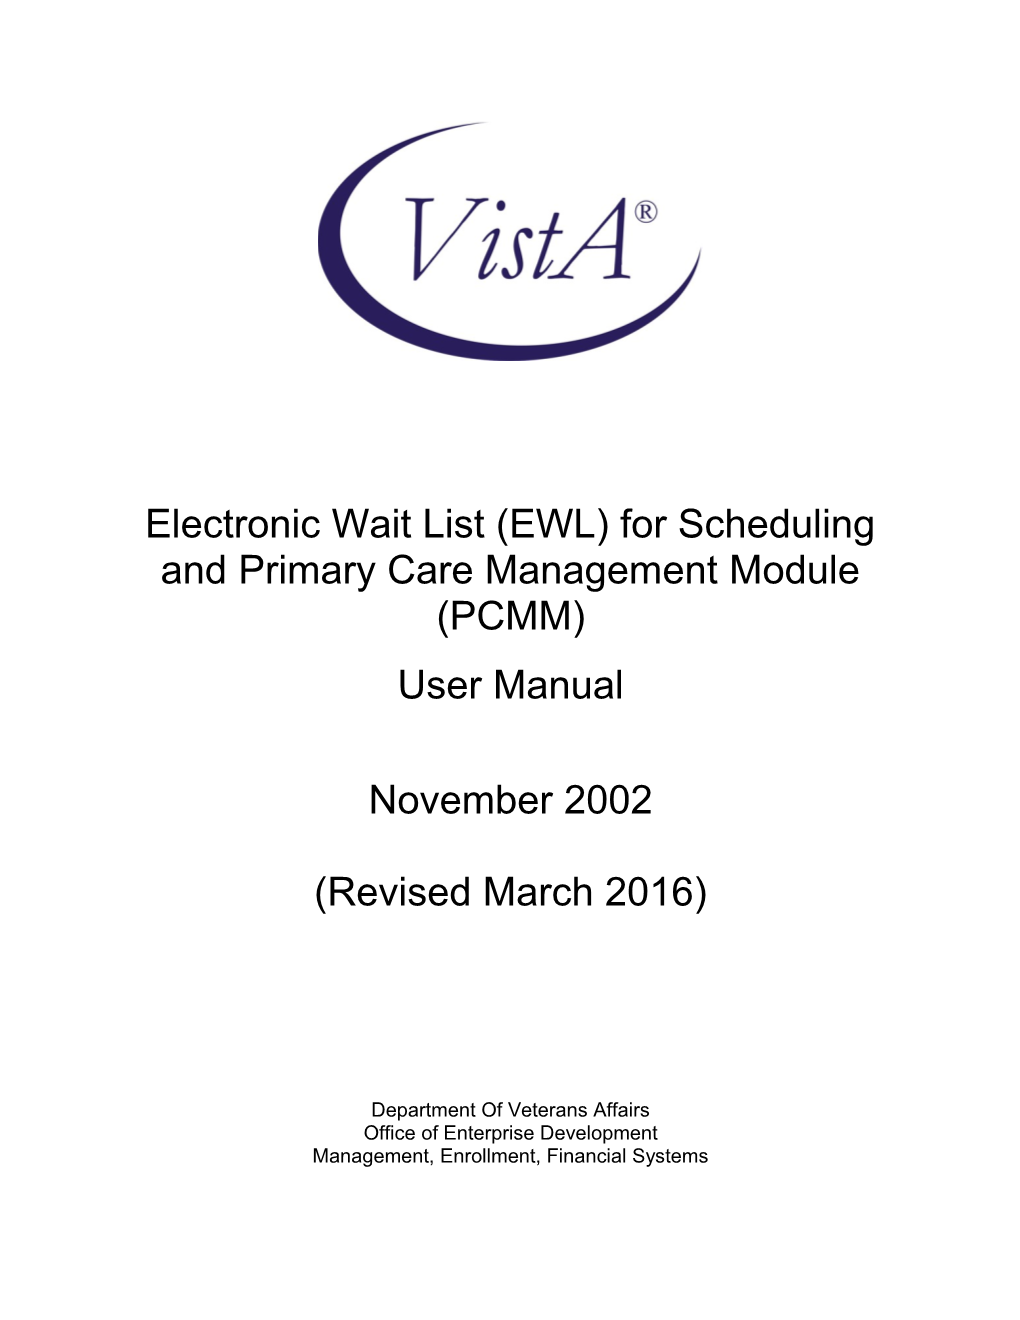 Electronic Wait List (EWL) for Scheduling and Primary Care Management Module (PCMM)